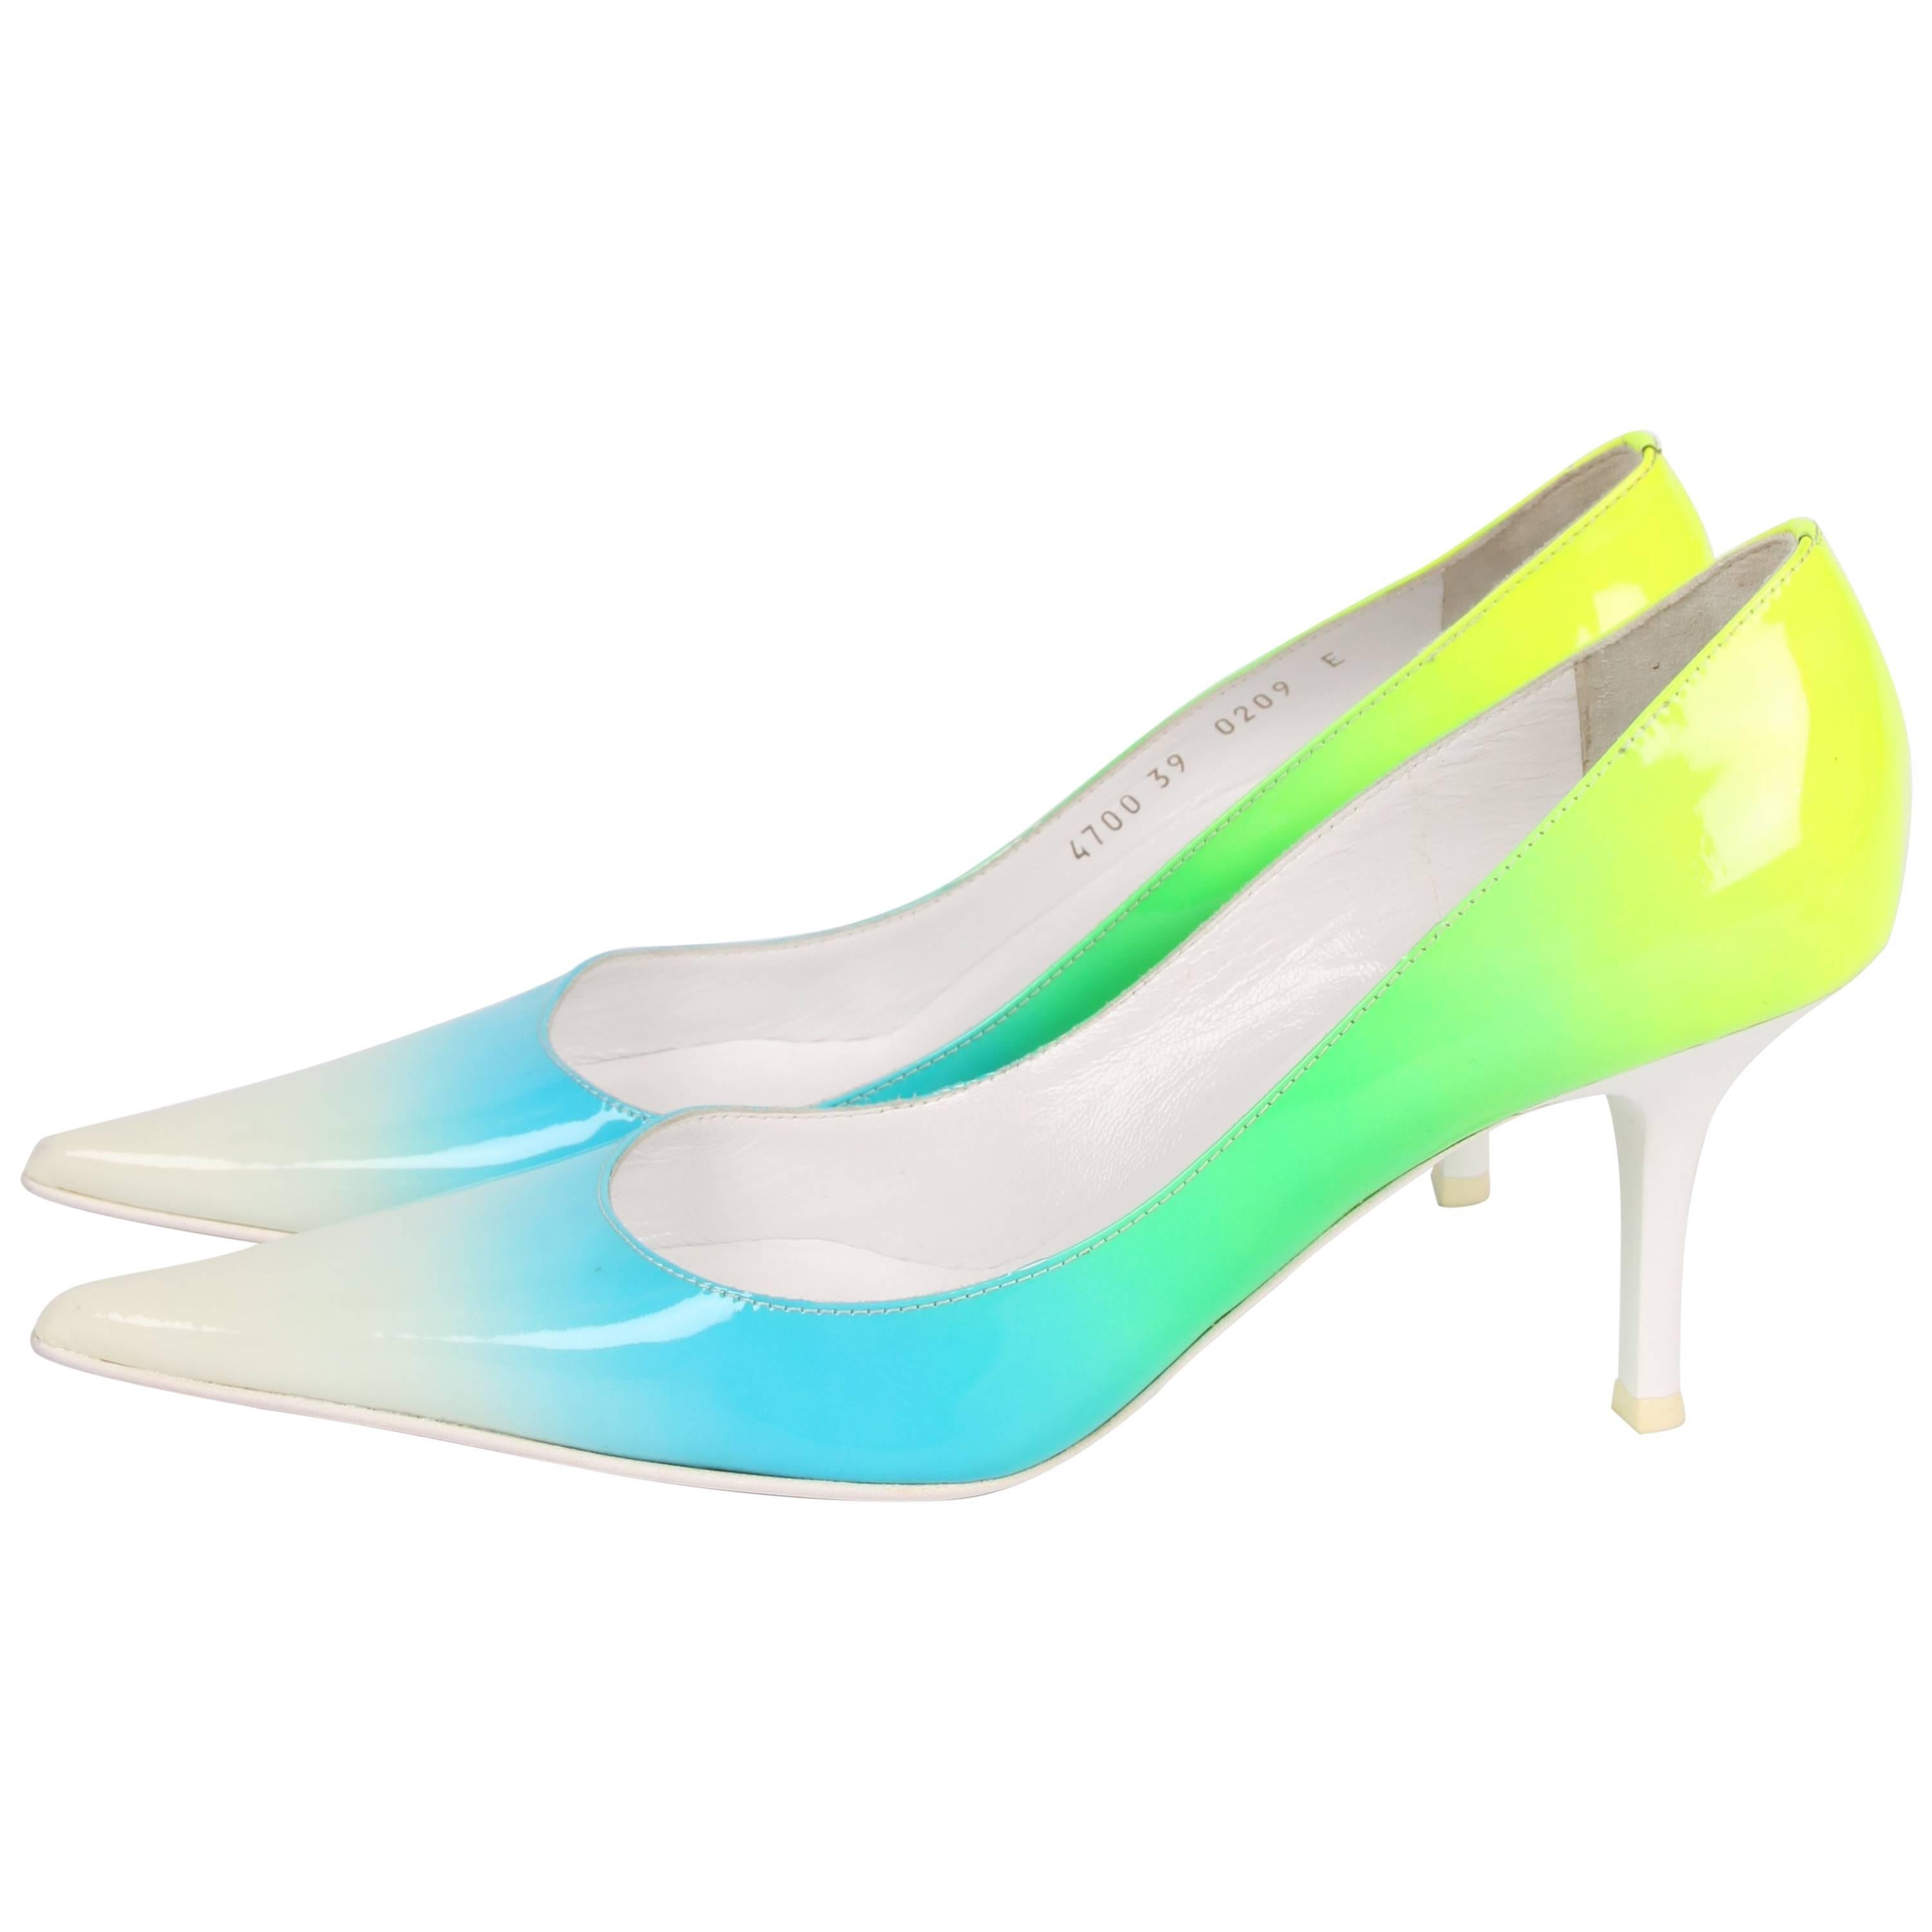 Giuseppe Zanotti Patent Leather Pumps - white/blue/green/yellow For Sale